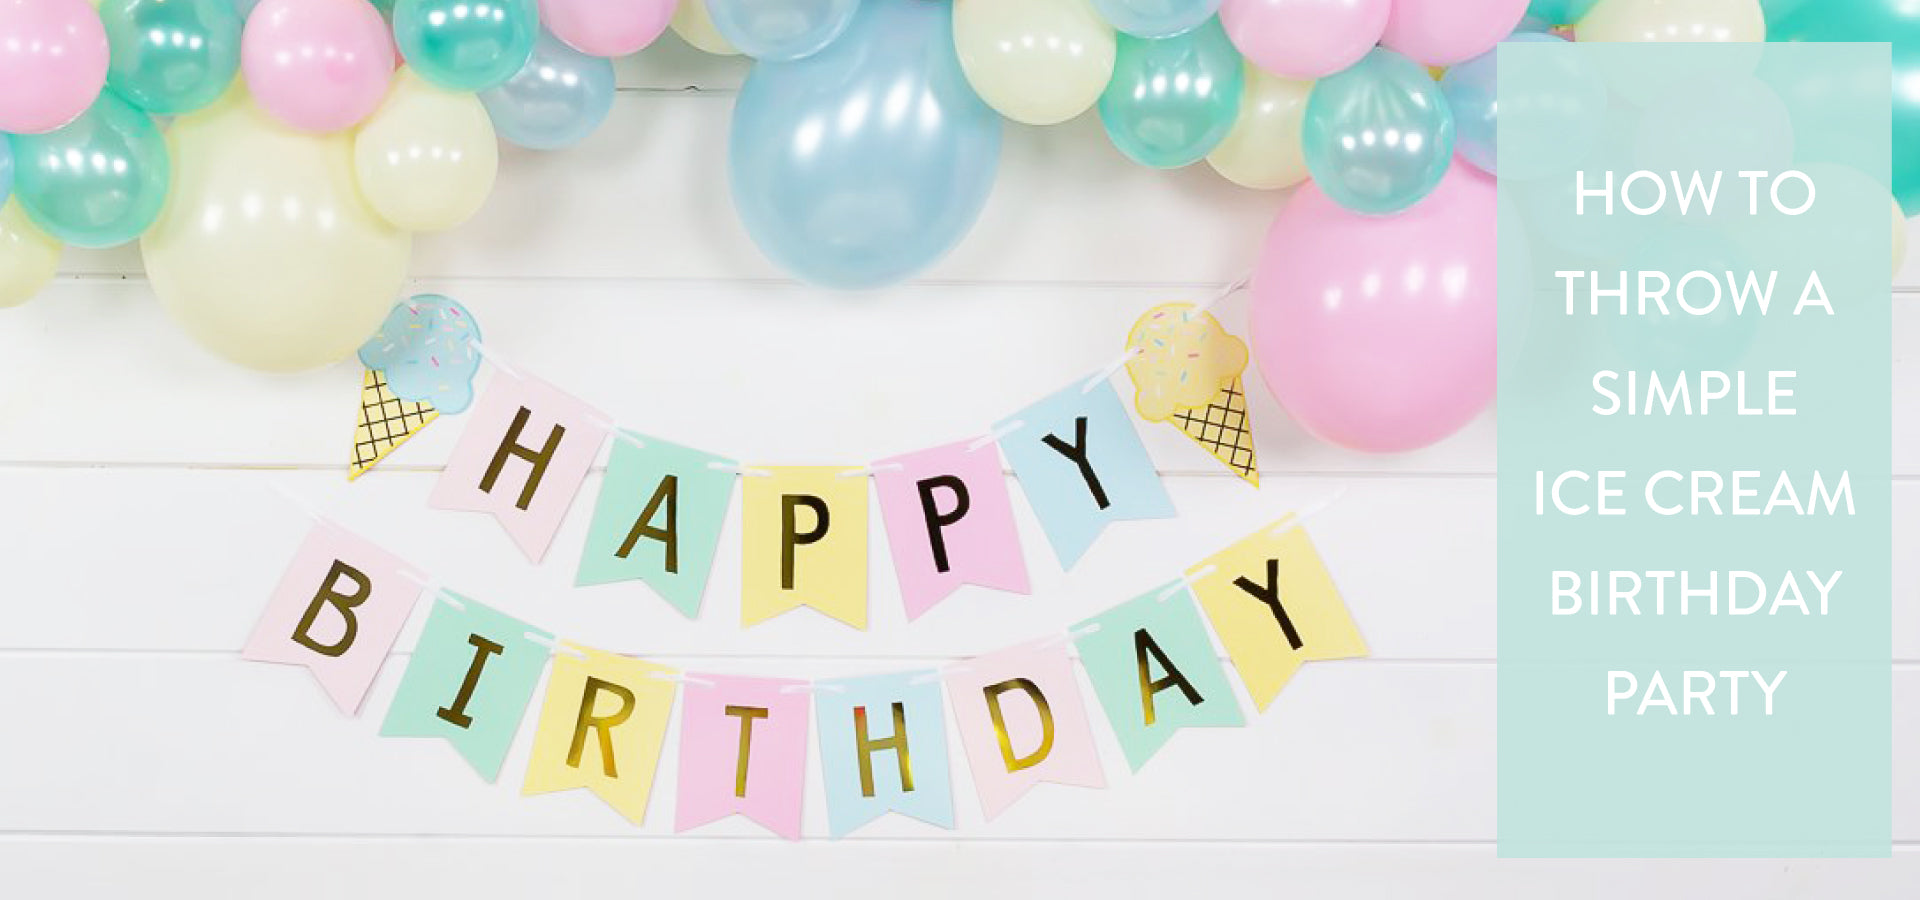 How to Throw a Simple Ice Cream Birthday Party | The Party Darling